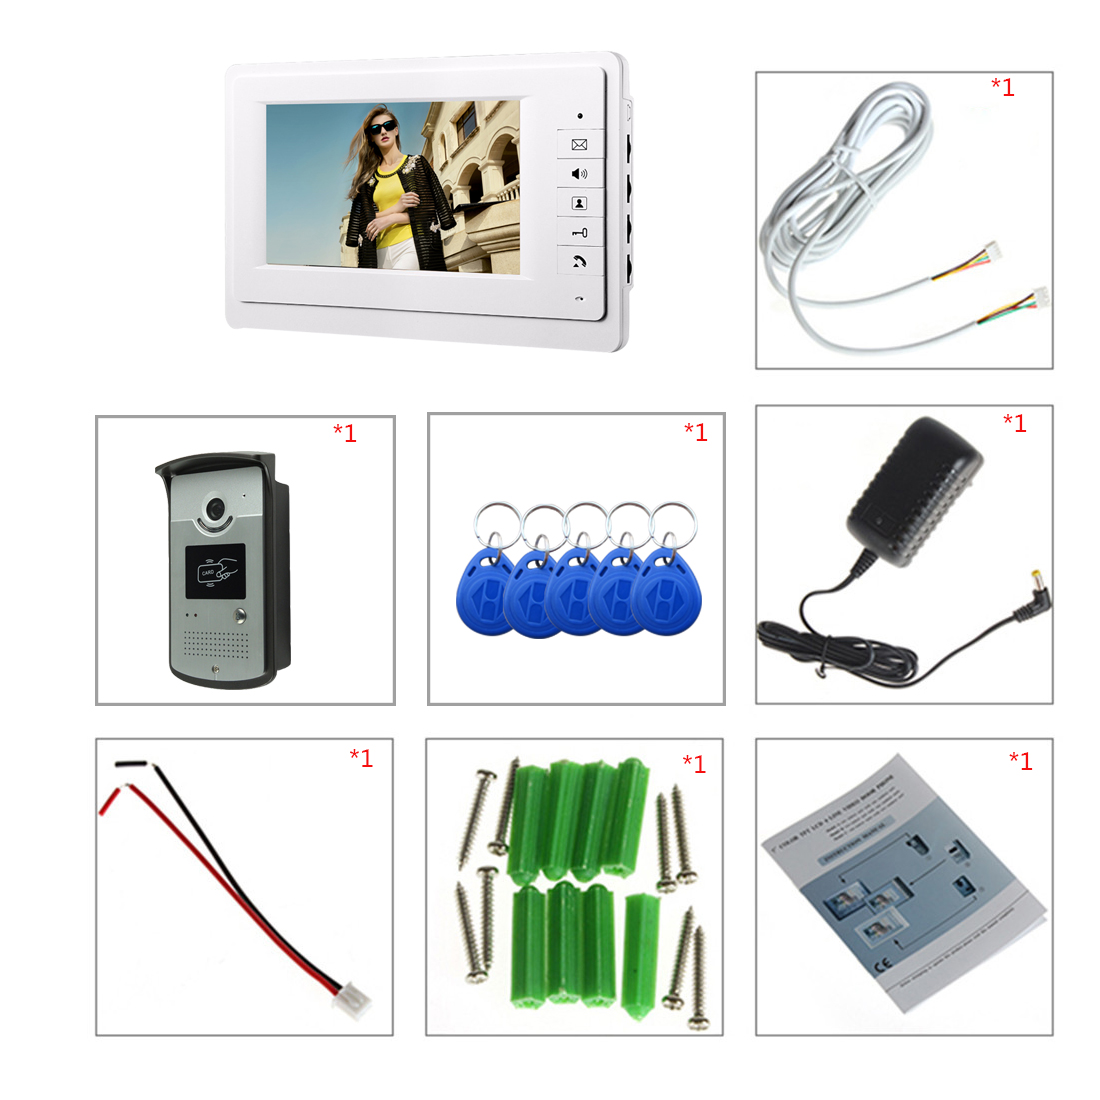 Video Doorbell Kits With RFID Card Reader Function